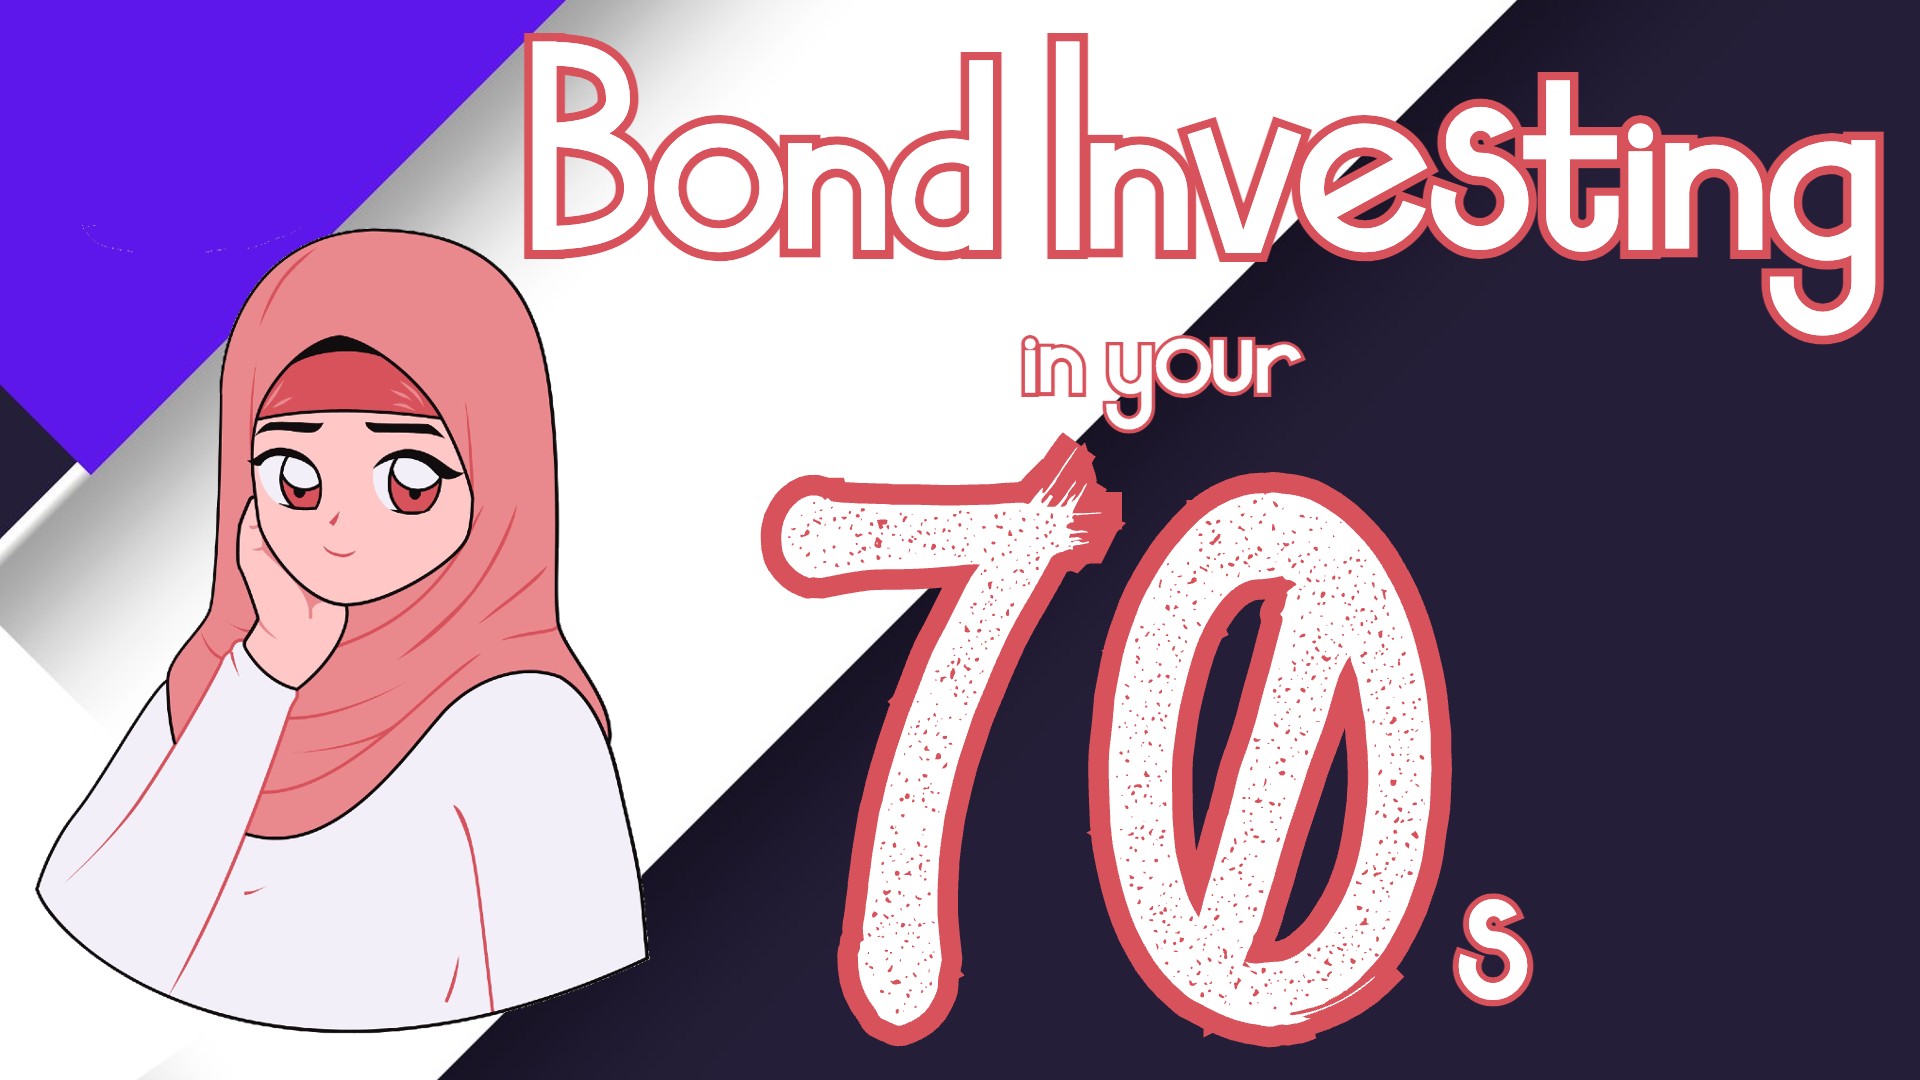 Bond Investing in Your 70s